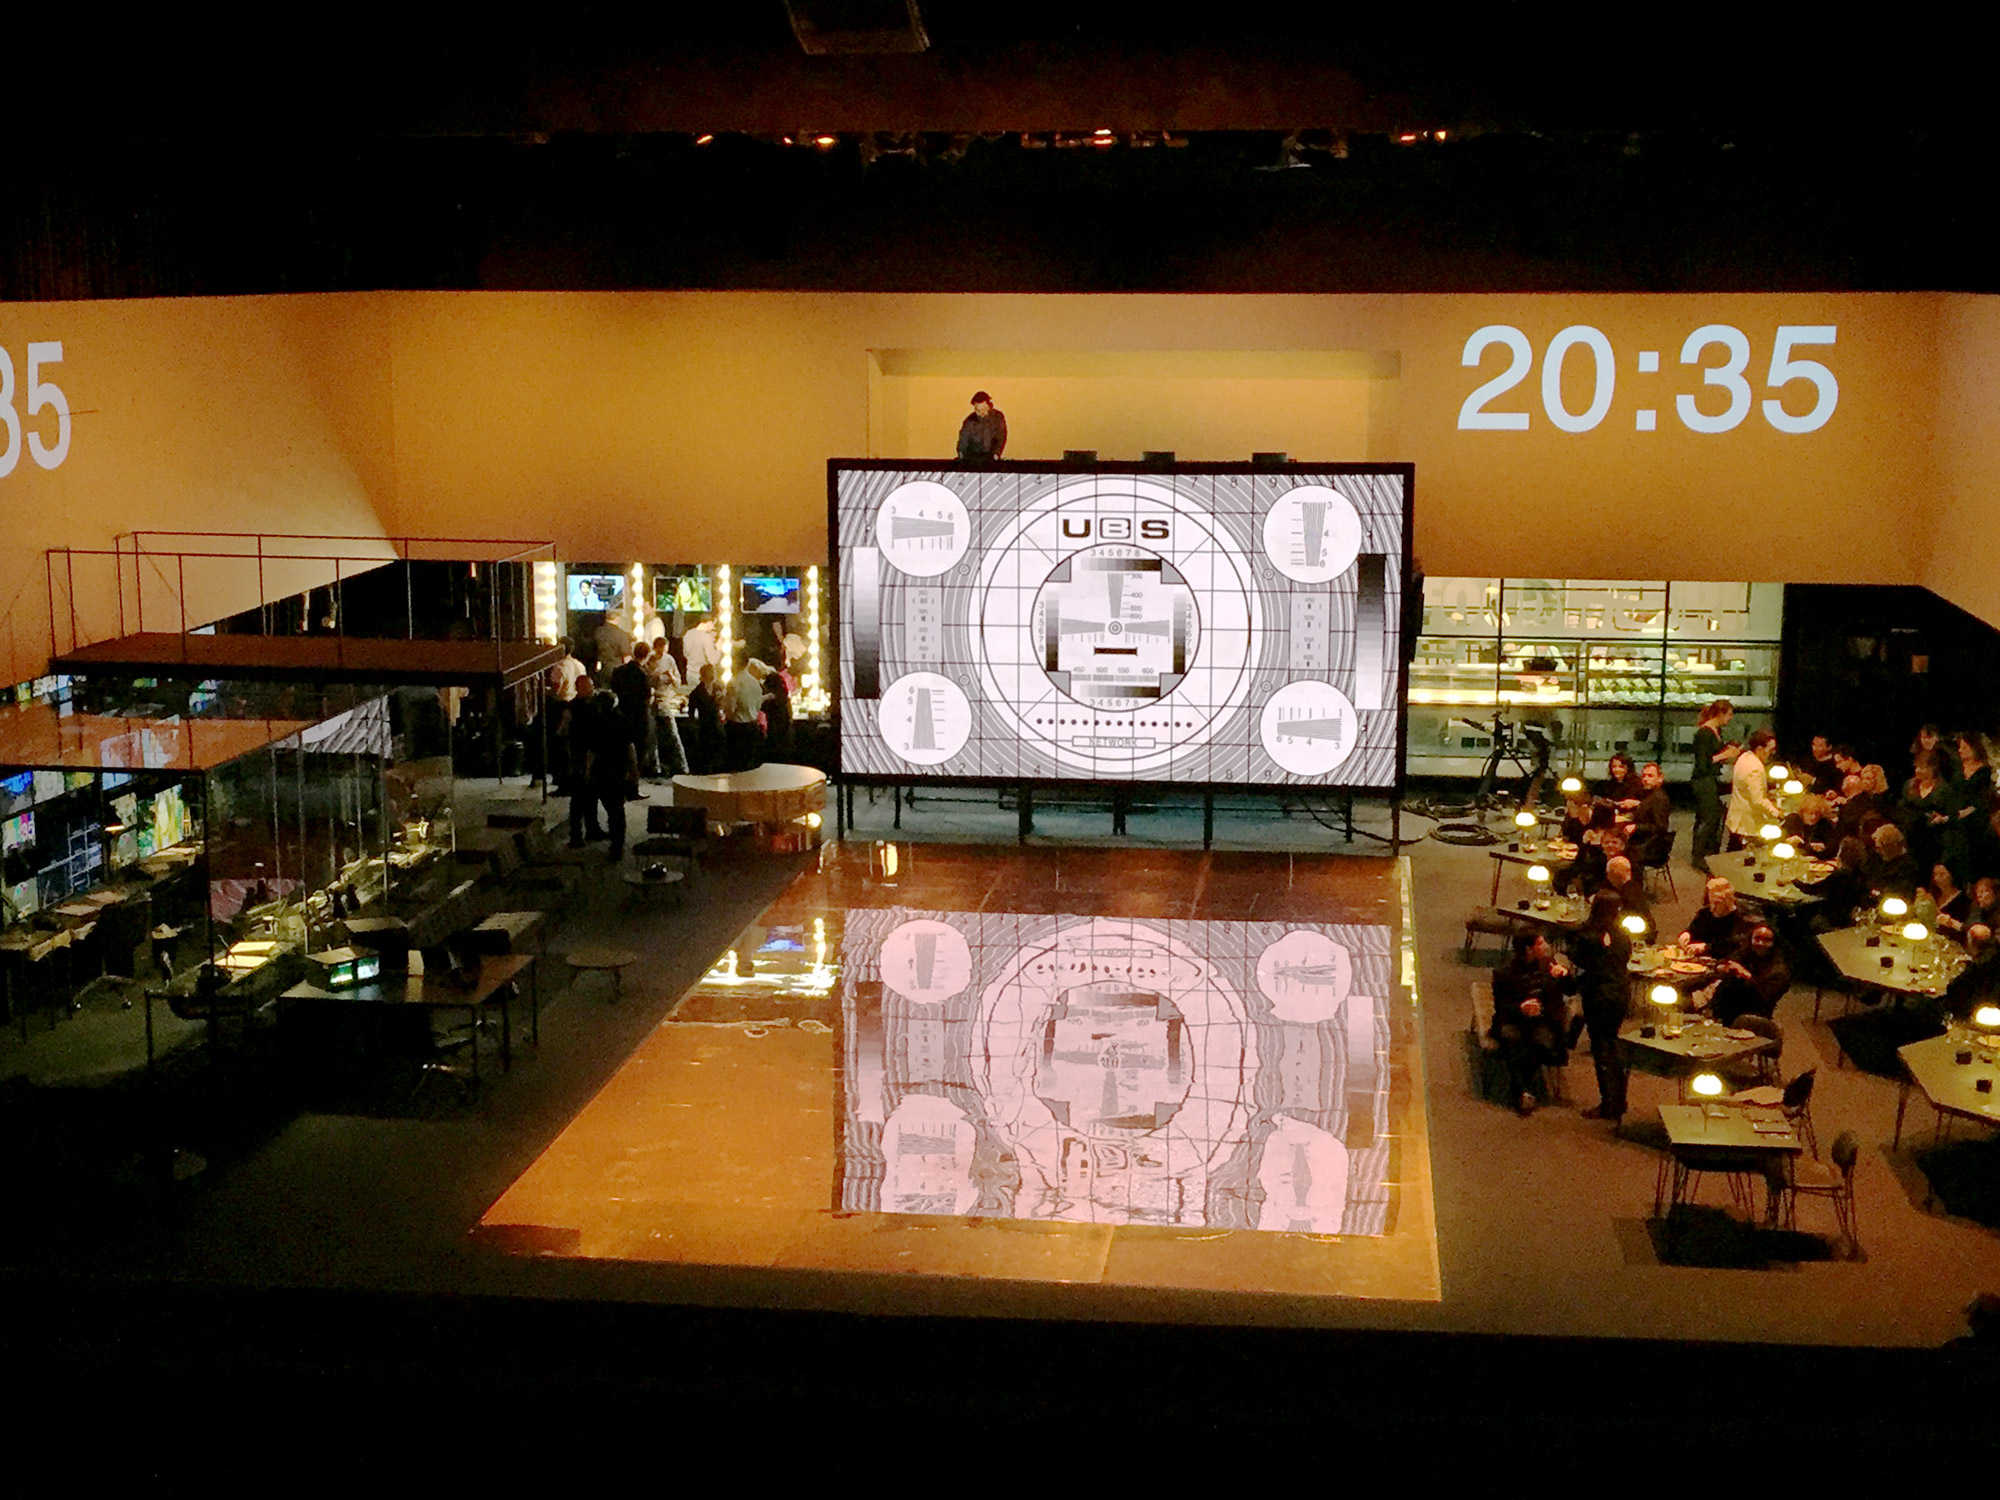 A large, open stage. To the right are several tables with people aorund them. To the rear a large screen shows a test-card, next to it a projected digital clock reads 20:35.